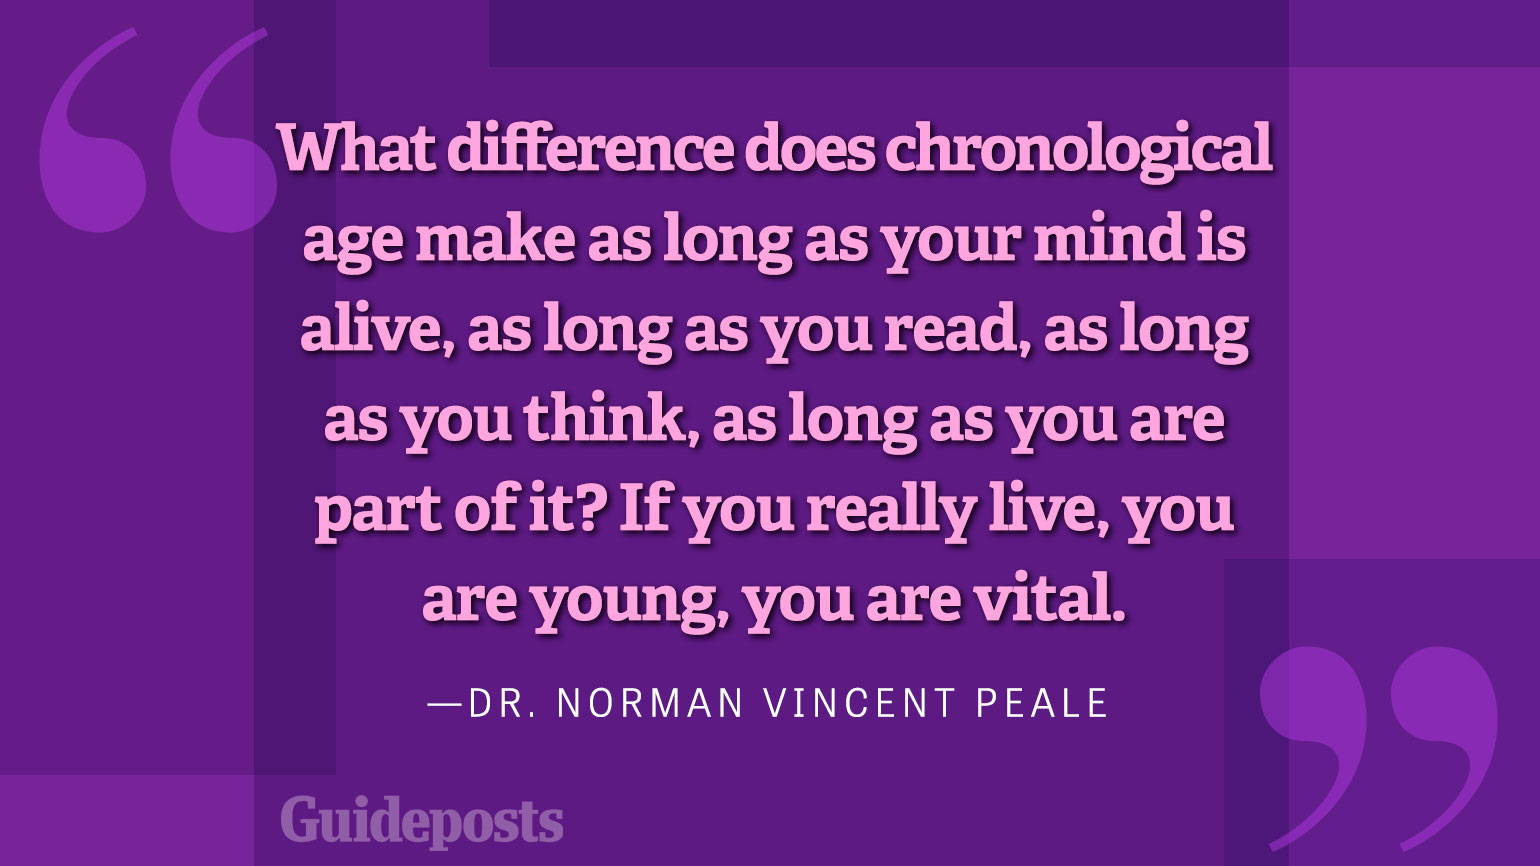 What difference does chronological age make as long as your mind is alive, as long as you read, as long as you think, as long as you are part of it? If you really live, you are young, you are vital.